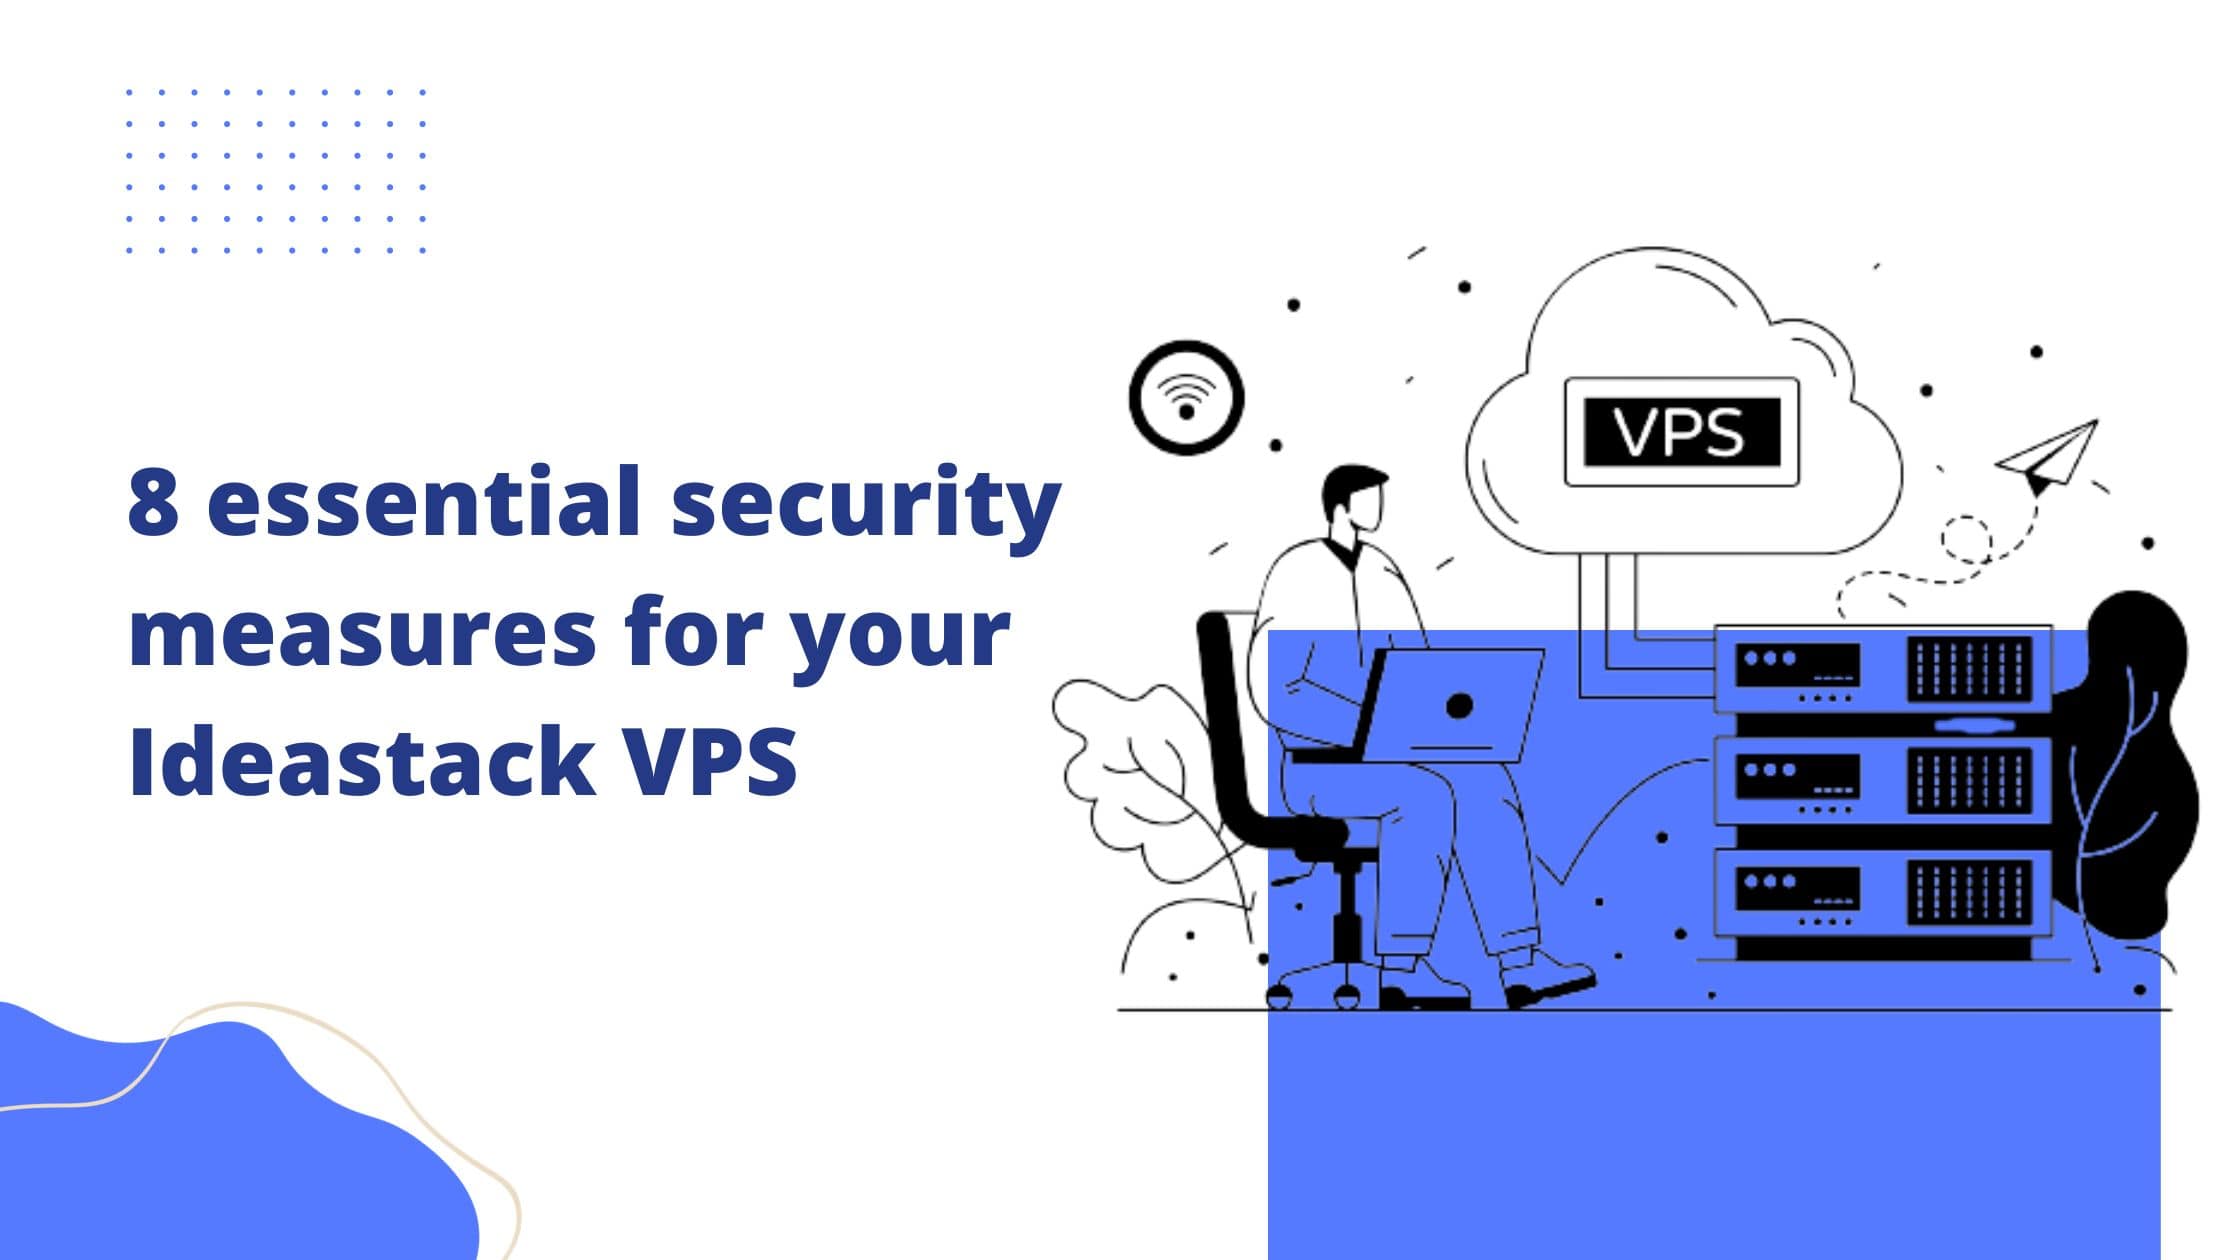 8 essential security measures for your Ideastack VPS